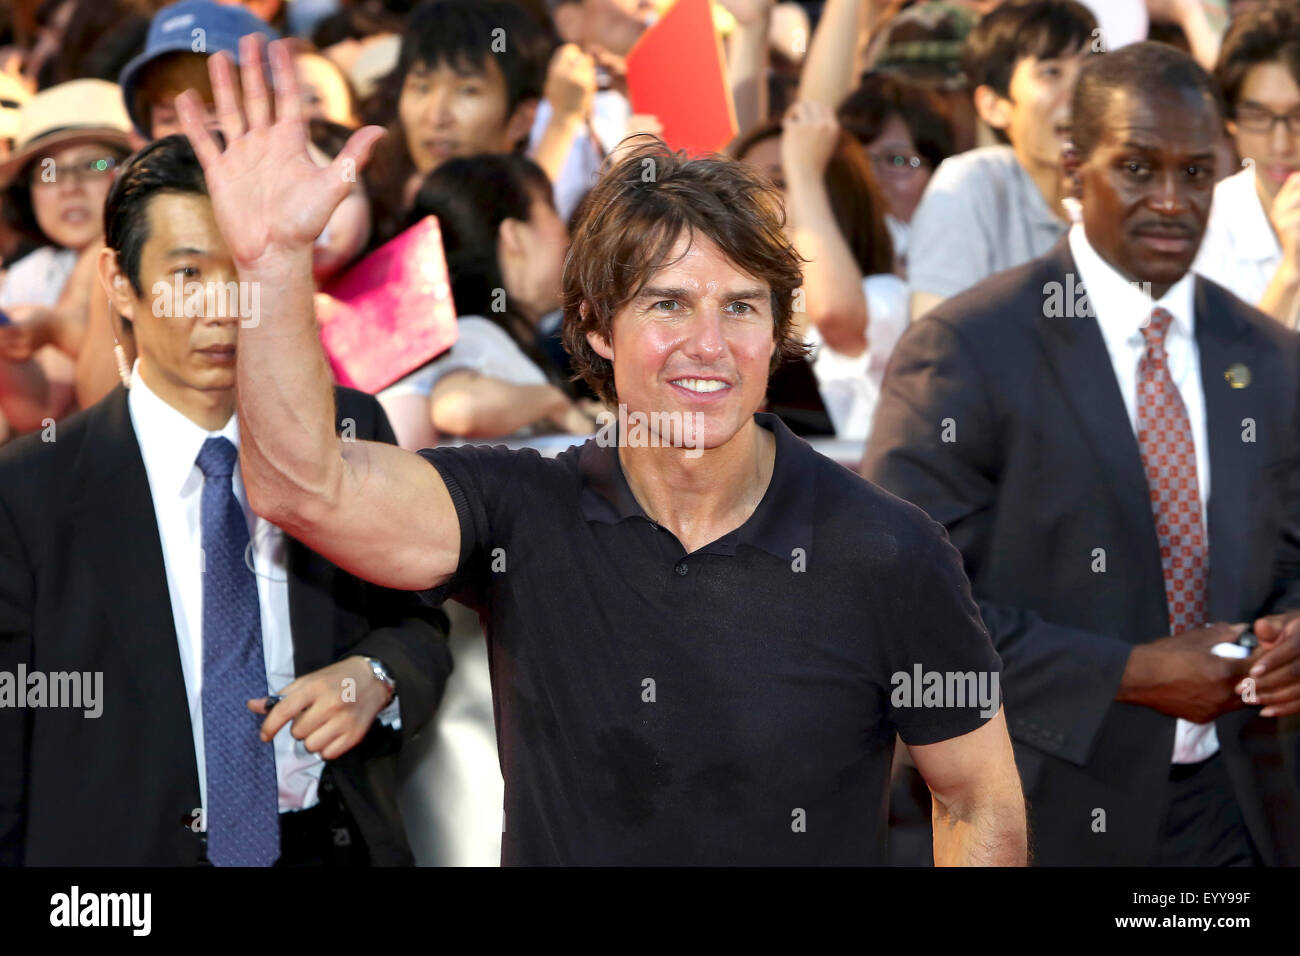 Actor Tom Cruise attends the Japan Premiere of 'Mission: Impossible - Rogue Nation' at the Toho Cinemas Shinjyuku in Tokyo on August 03, 2015/picture alliance Stock Photo